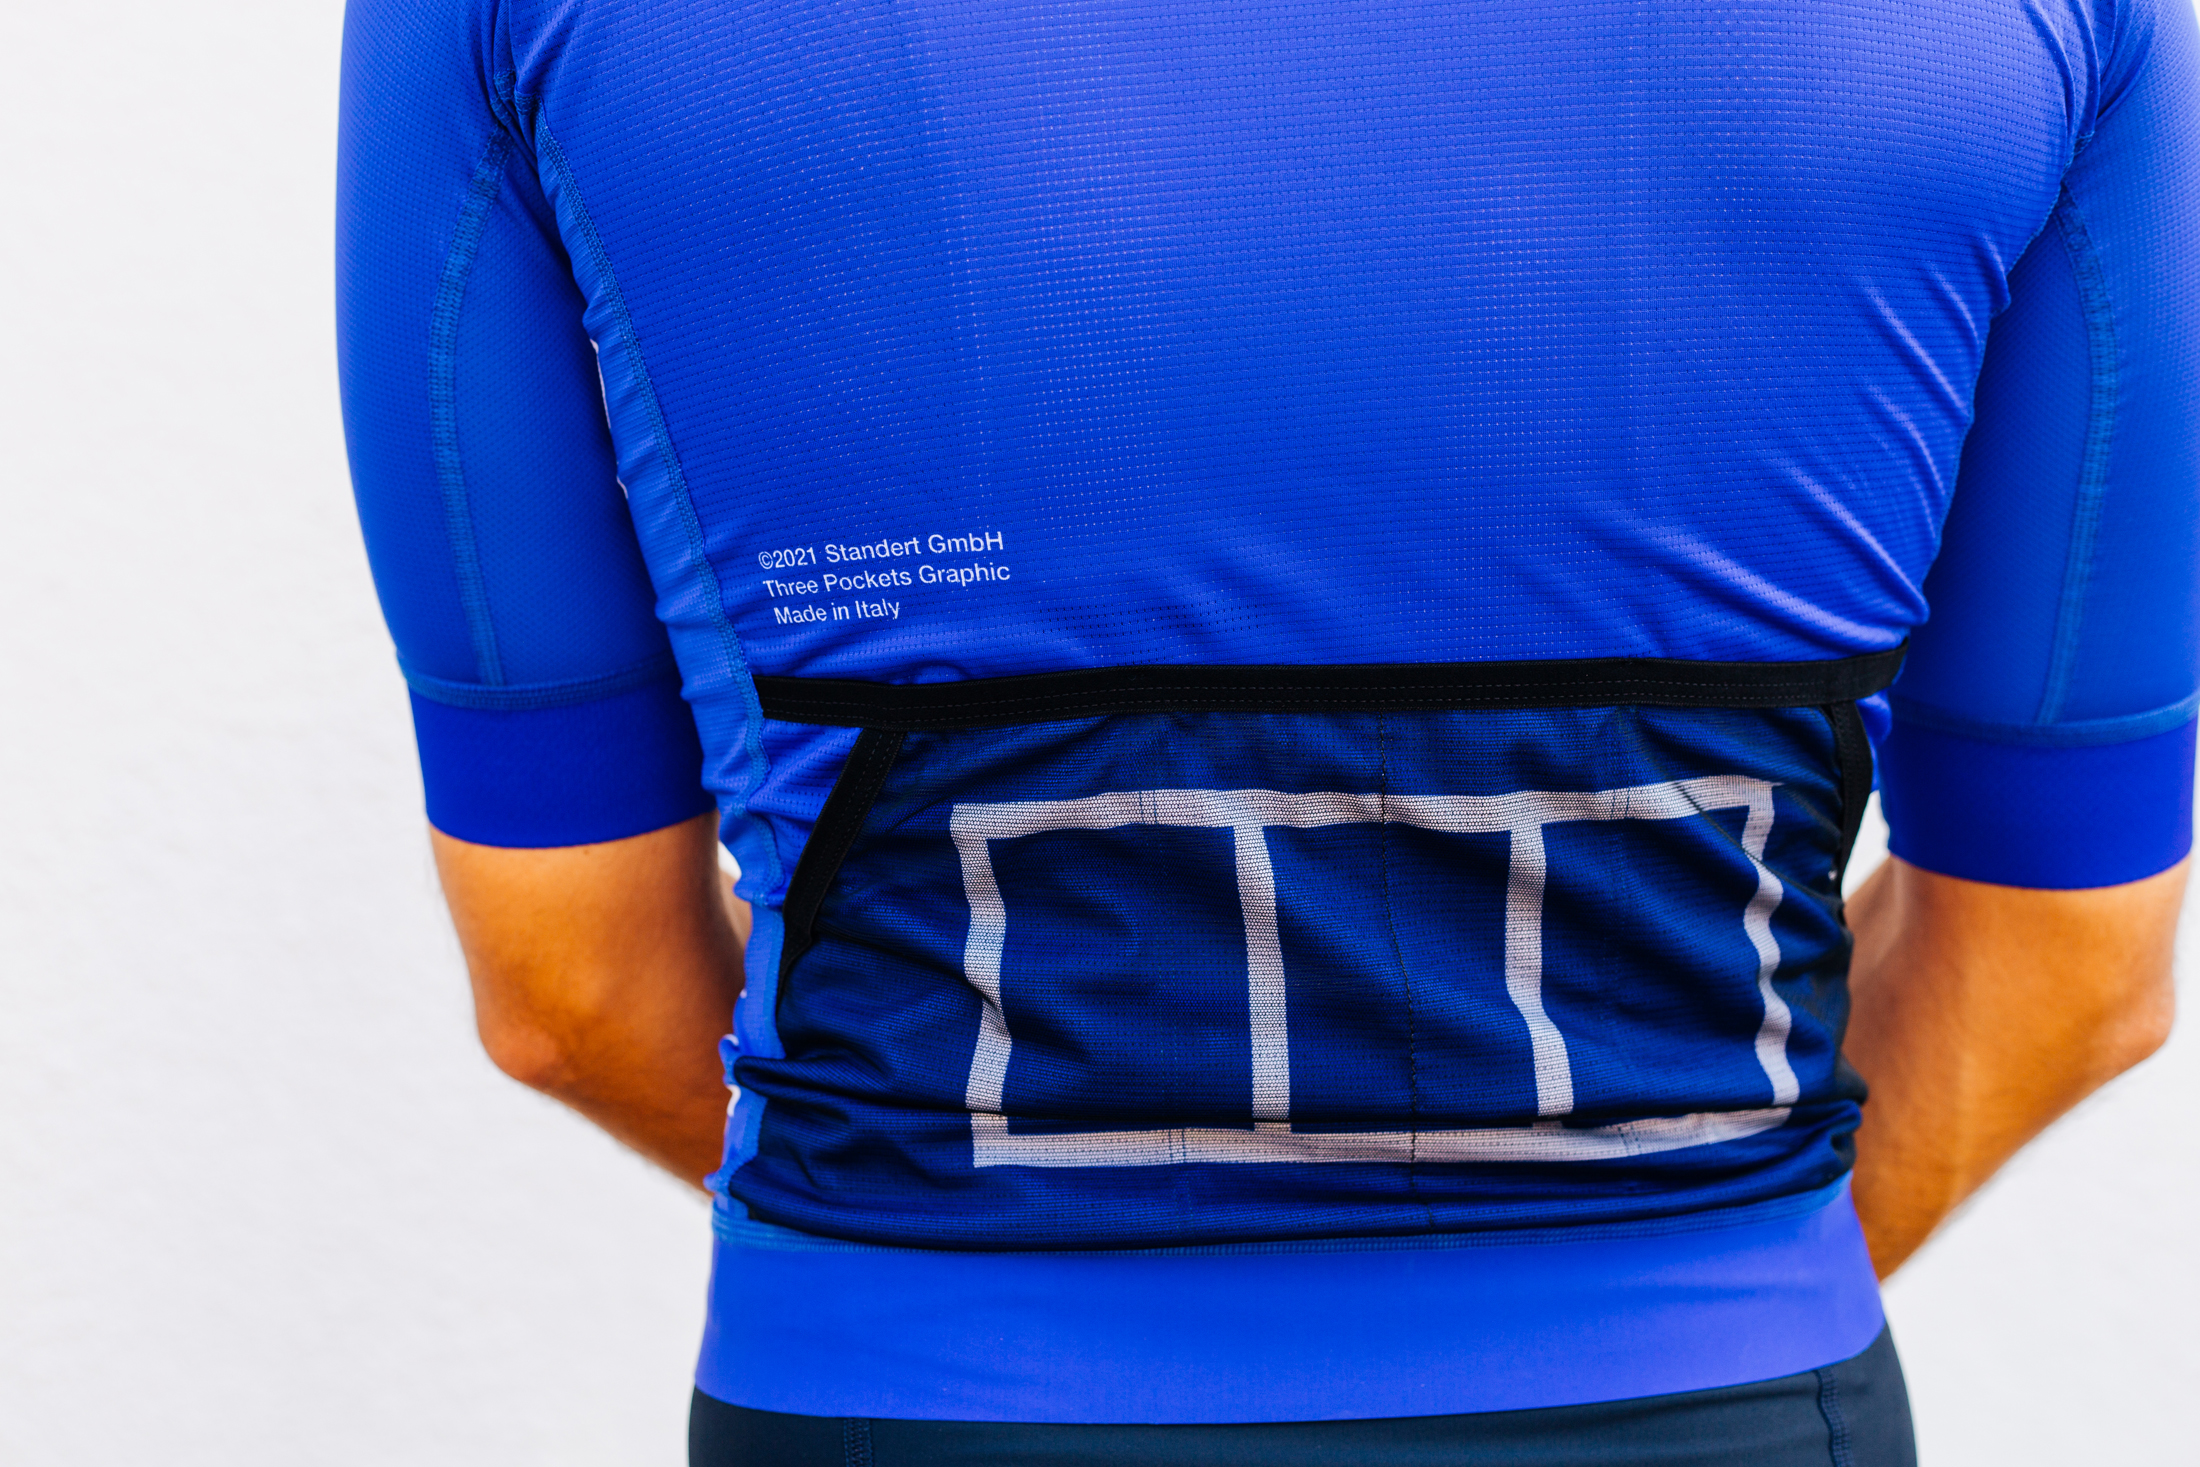 Blue Road Cycling Jersey by Standert Premium